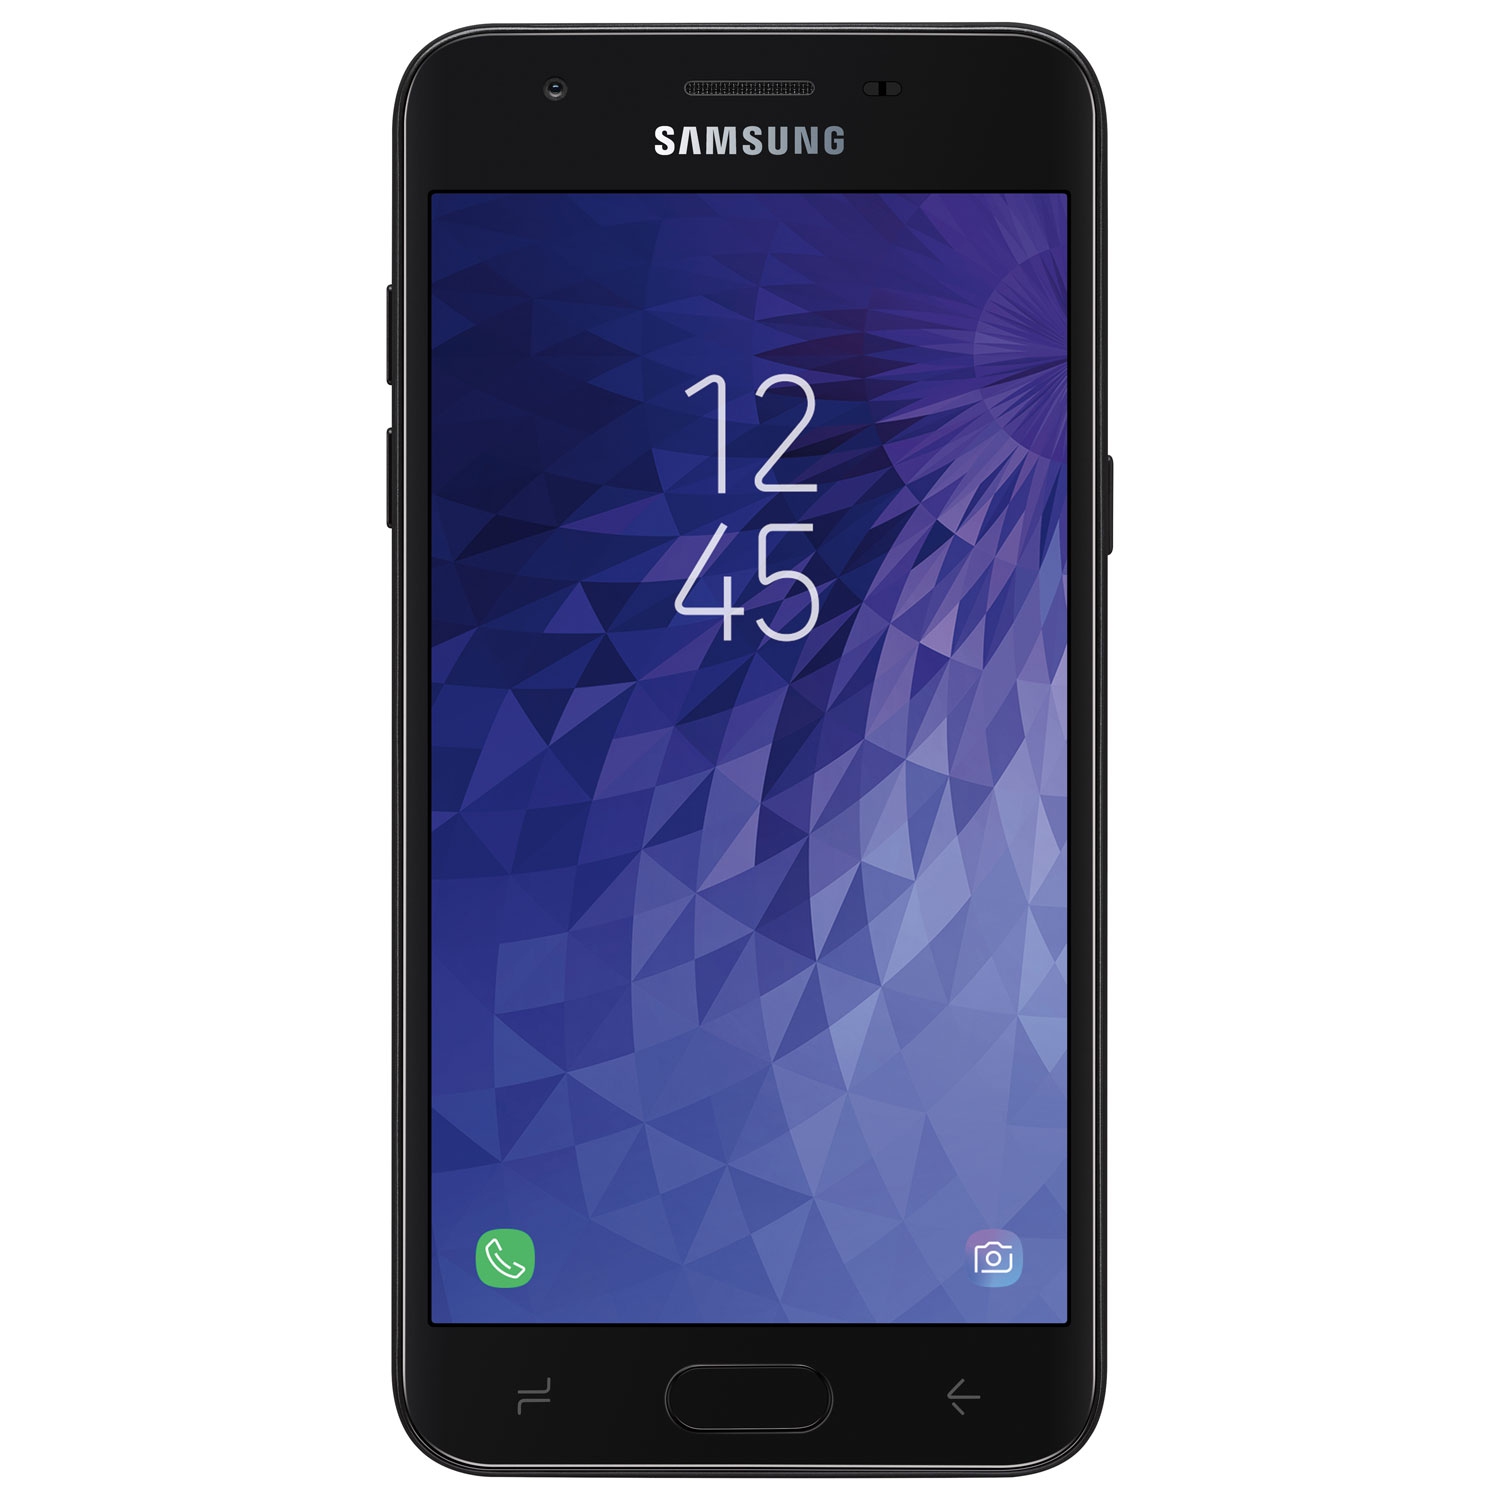 Samsung Galaxy J3 (2018) 16GB - Black - Unlocked - Certified pre-owned - Excellent Condtion